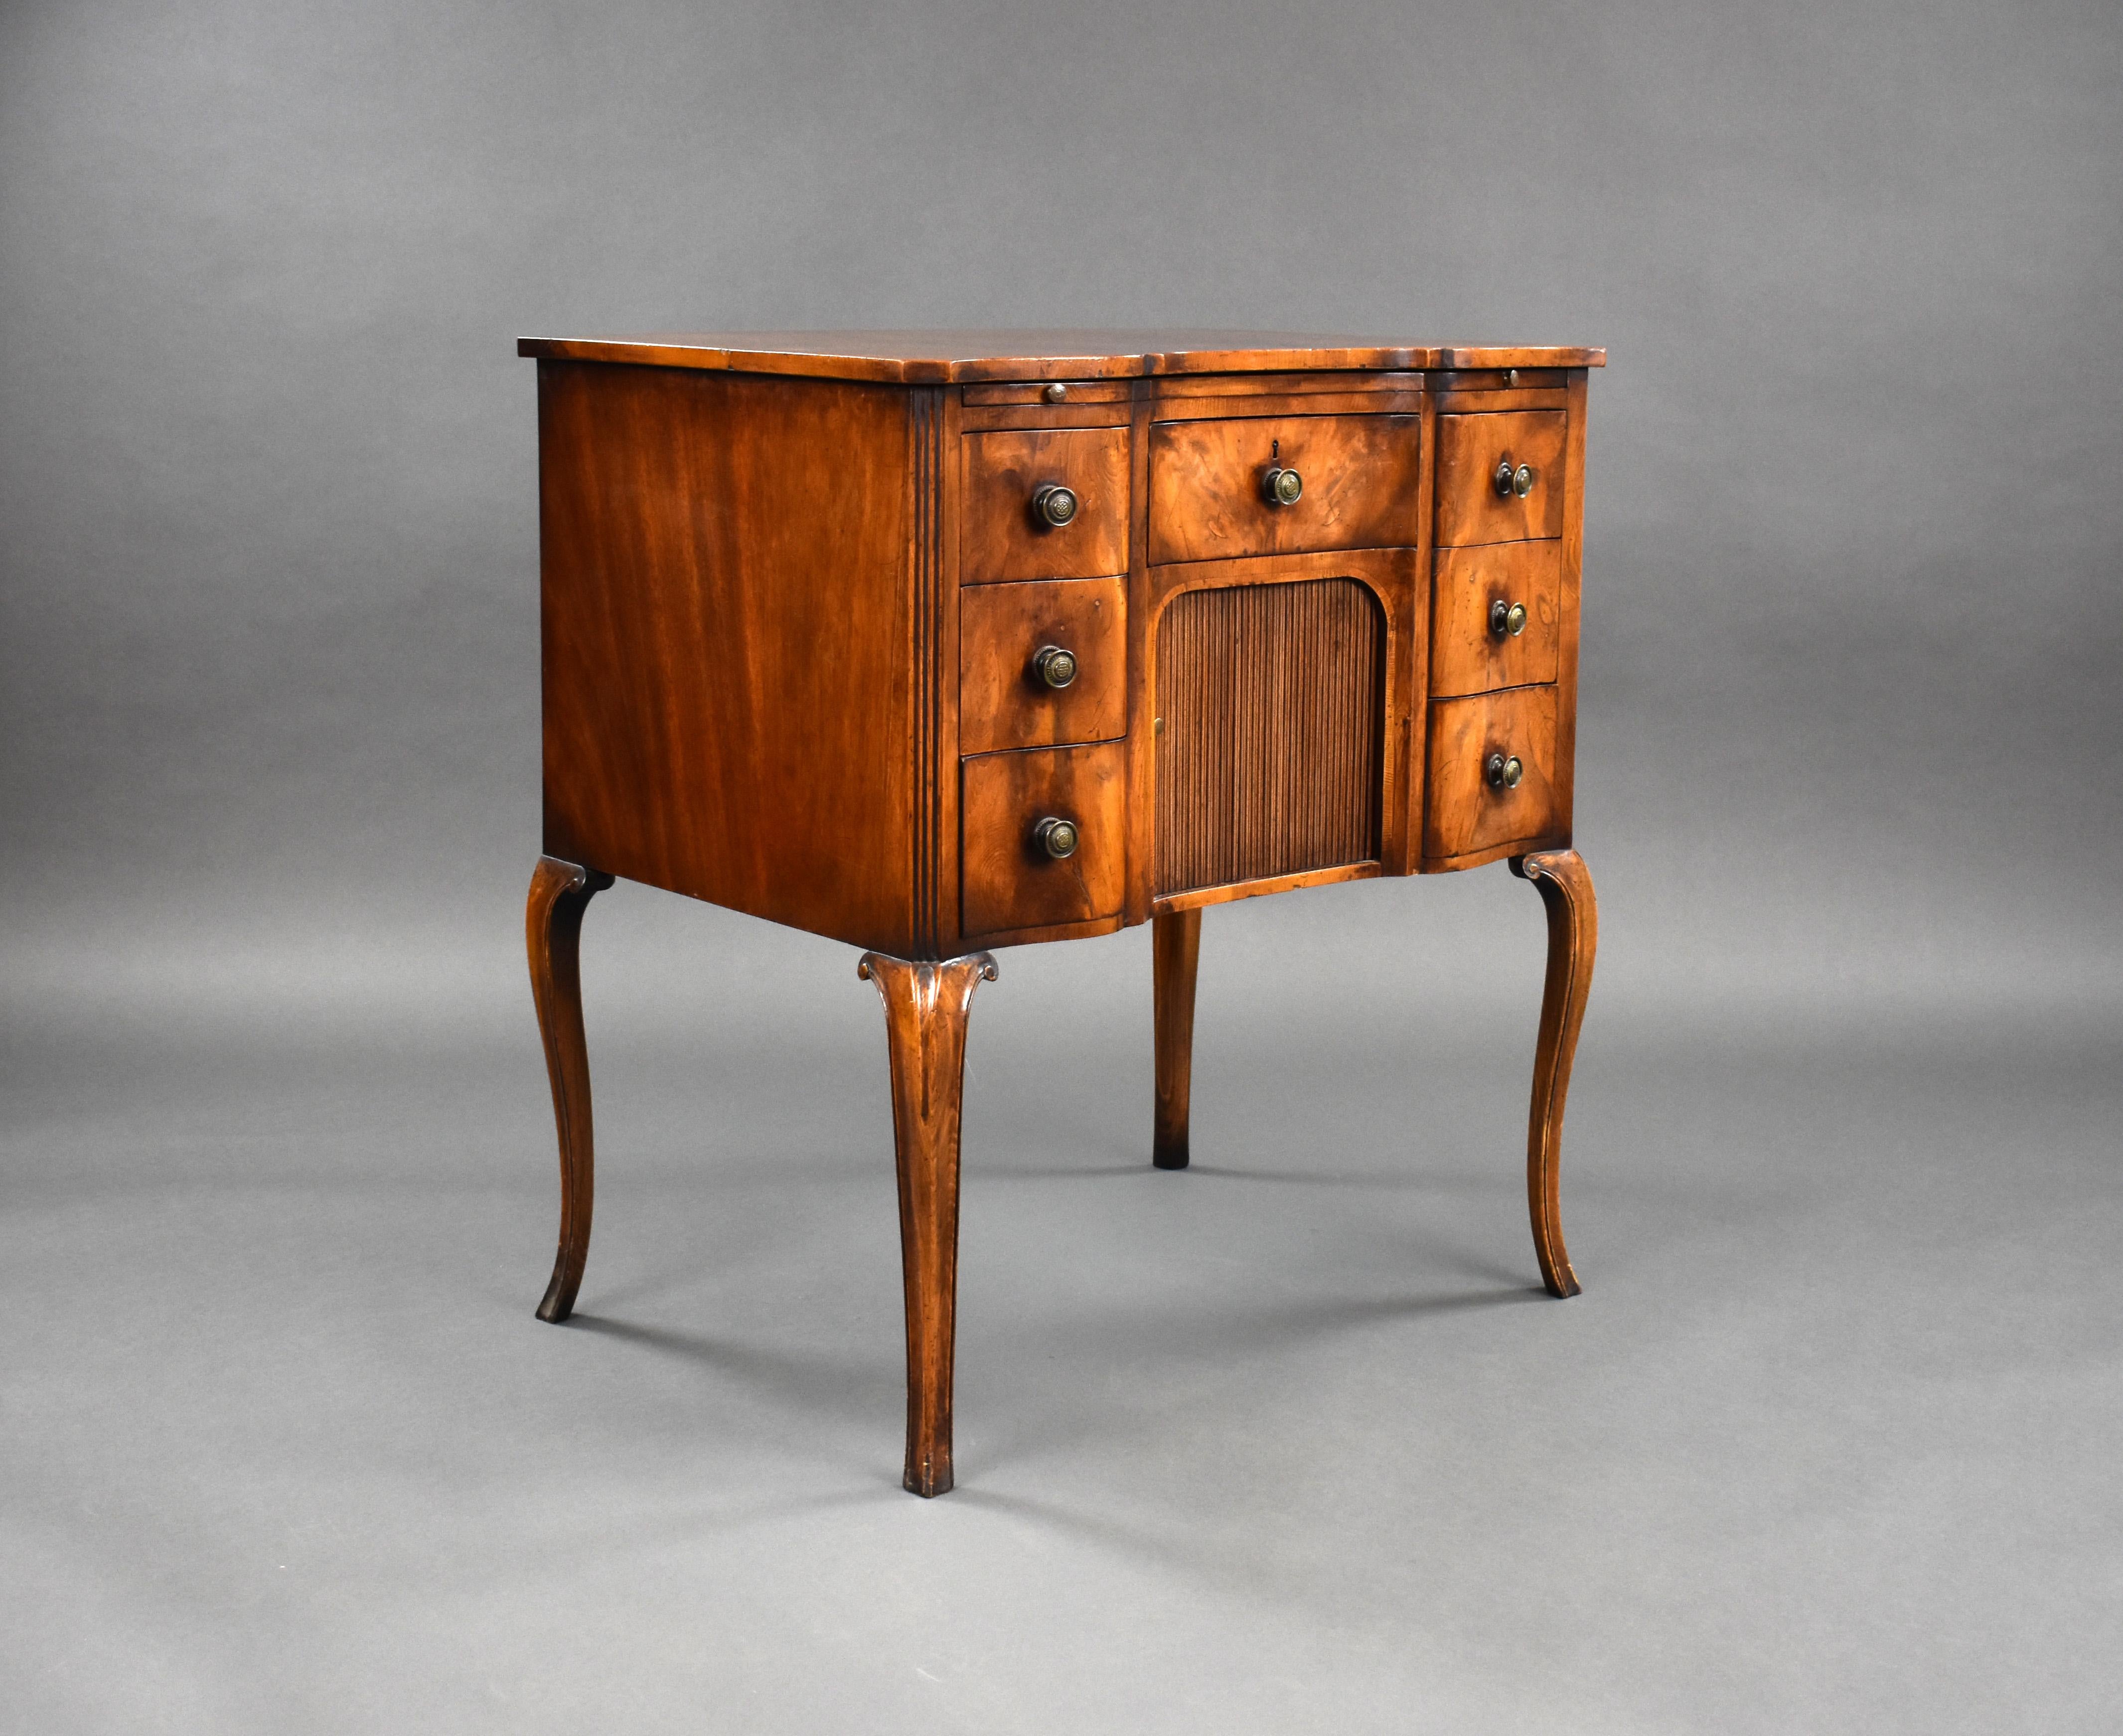 A good quality 19th century yew wood chest, serpentine in form, having a writing slide to the top over an arrangement of five drawers surrounding a tambour front. The chest stands on elegantly shaped legs and remains in very good condition for its